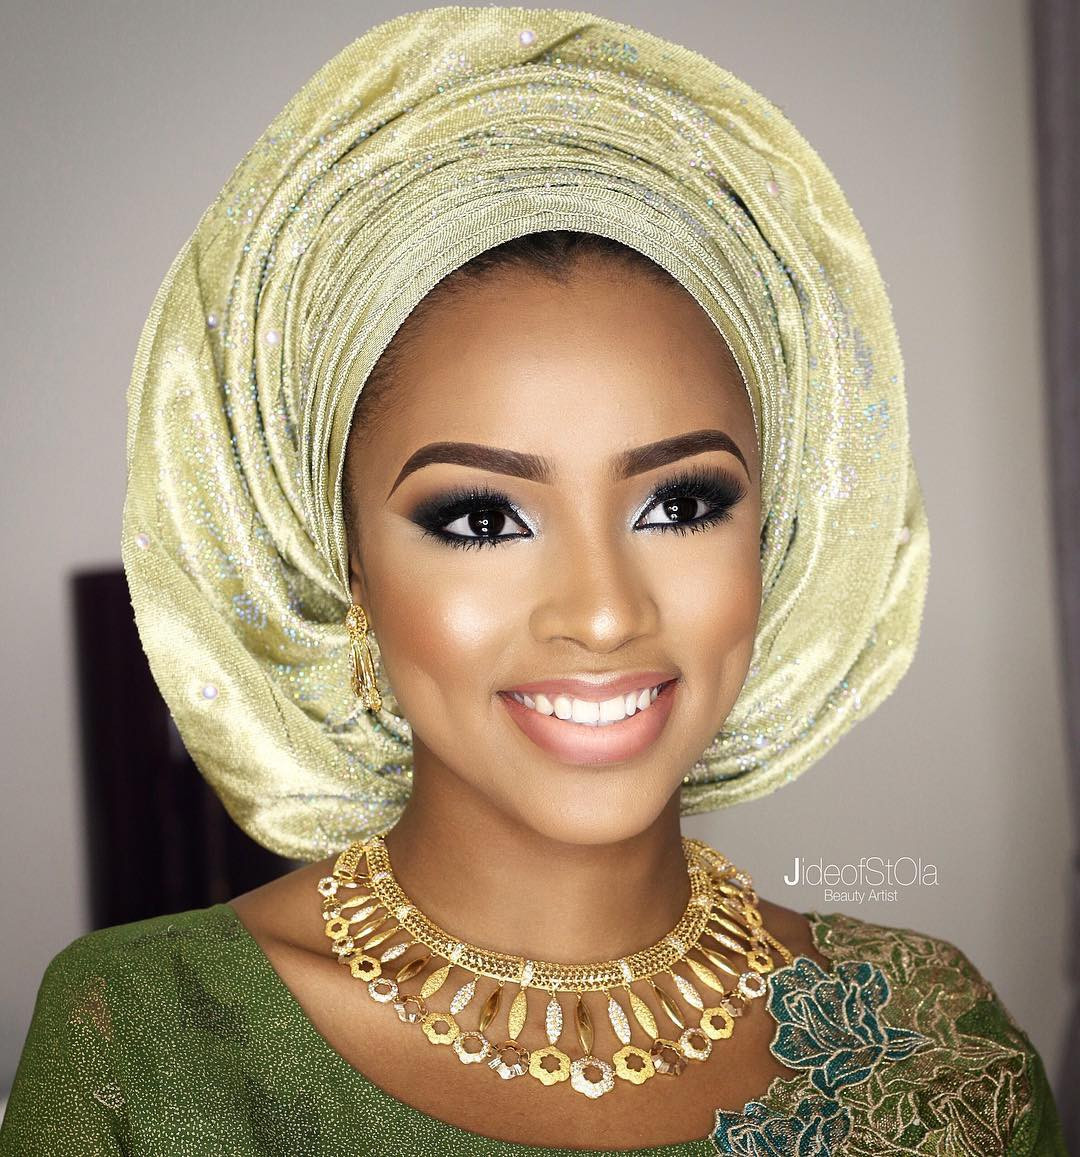 Wedding Guest Makeup Looks
 18 Perfect Wedding Guest Makeup Ideas To Copy From